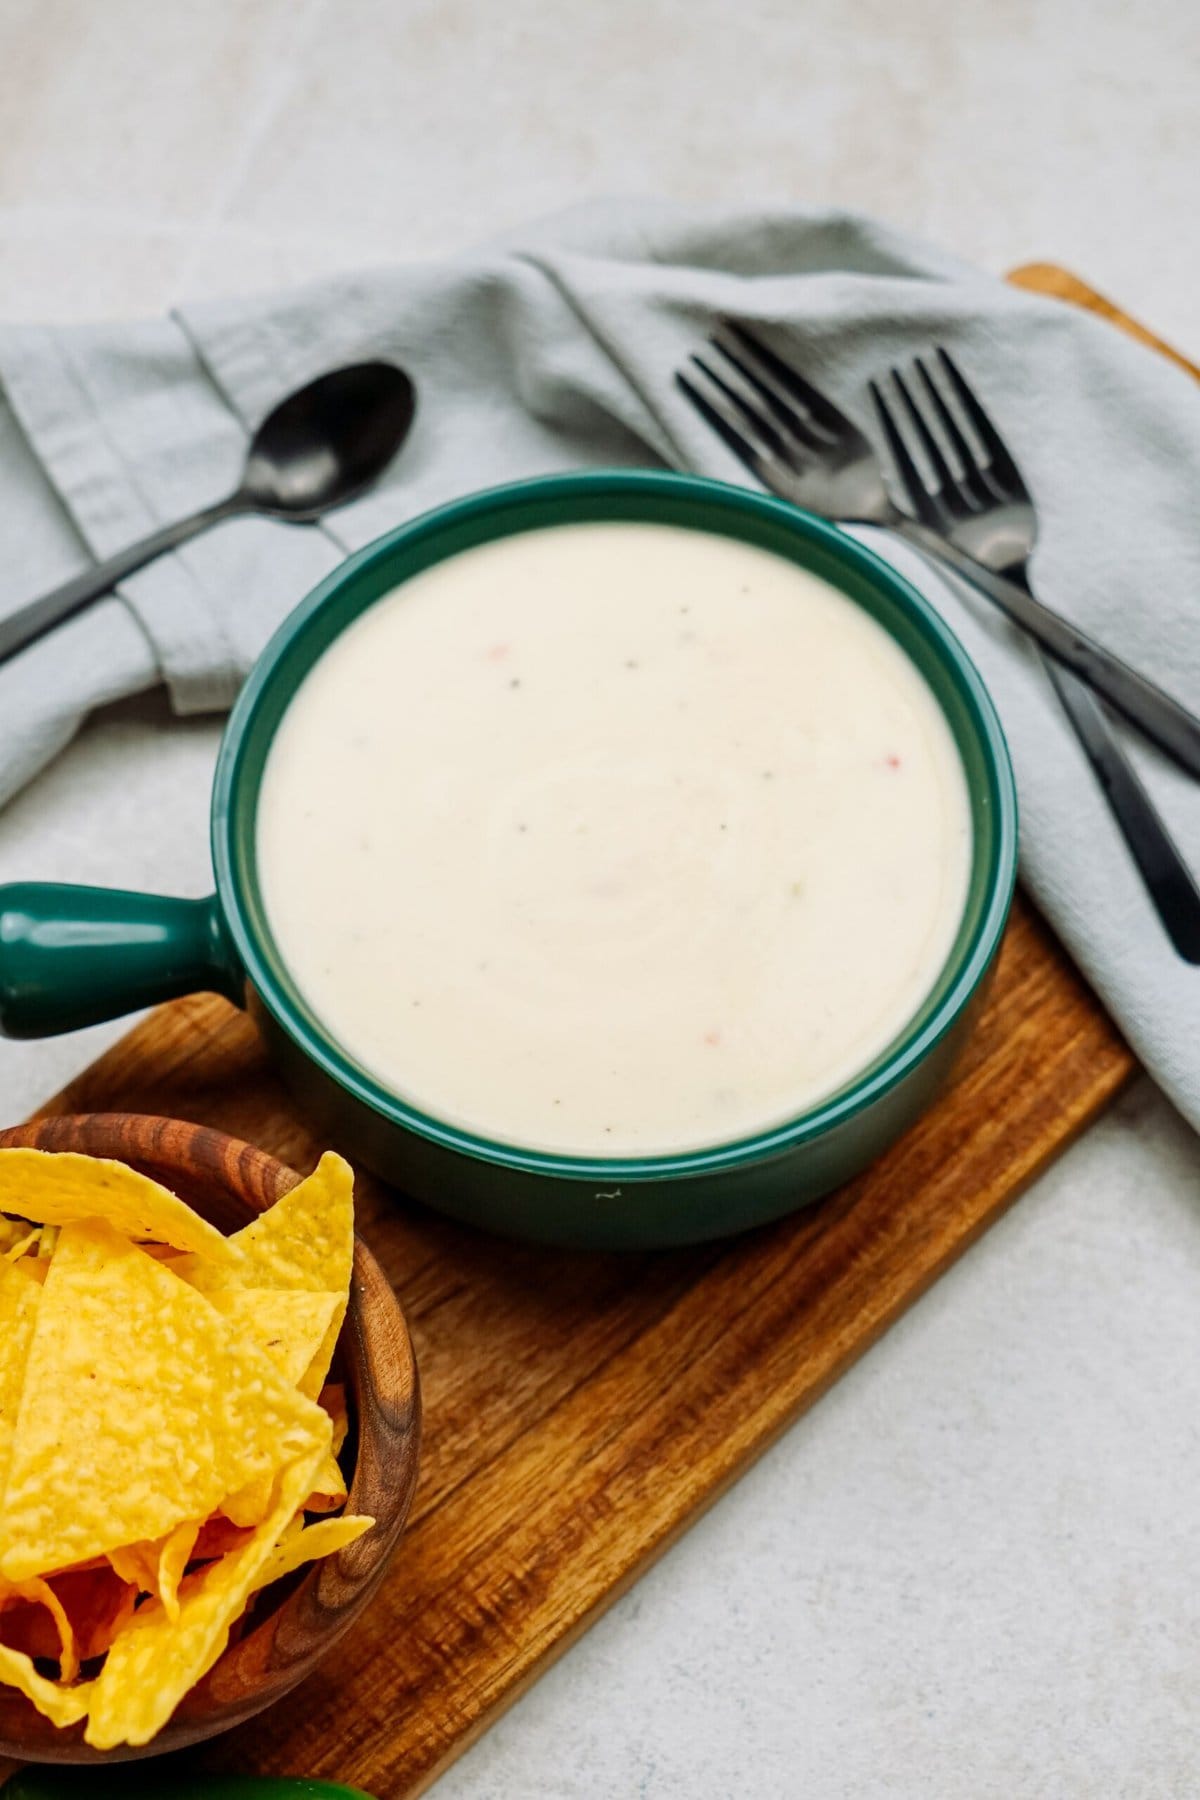 A green bowl filled with creamy white queso dip sits on a wooden board, accompanied by a small bowl of tortilla chips. Silverware and a folded napkin rest in the background, completing this inviting scene.